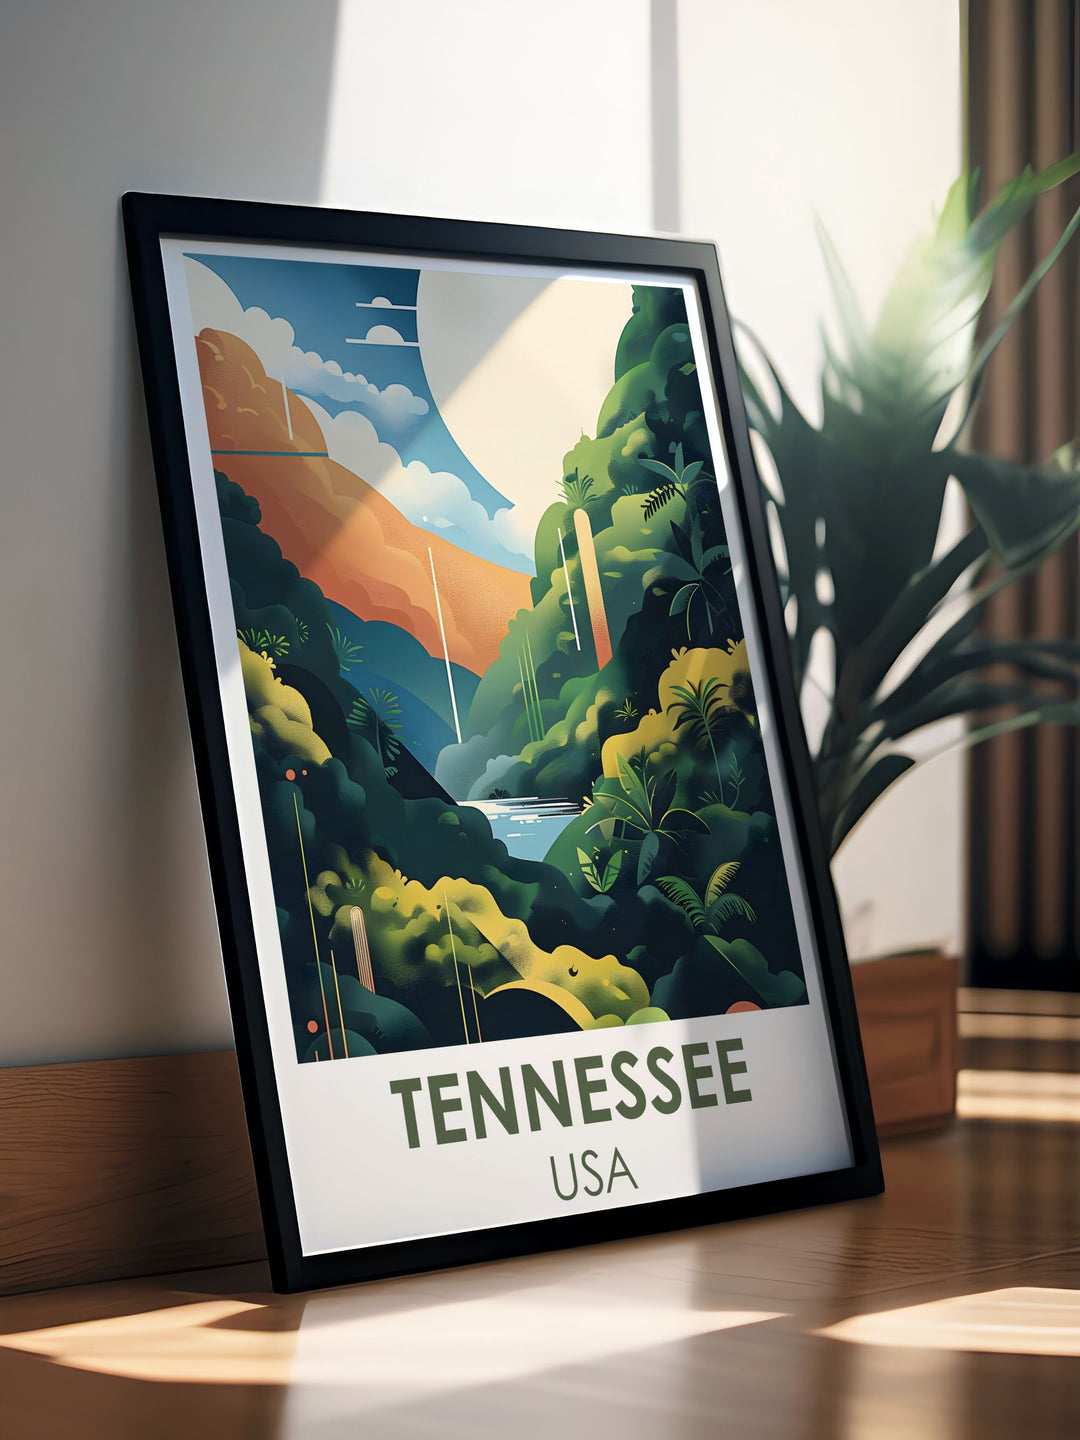 Country Music Print featuring the legendary Ryman Auditorium in Nashville Tennessee with the majestic Great Smoky Mountains National Park. A unique piece of art that celebrates the harmony of music and nature.